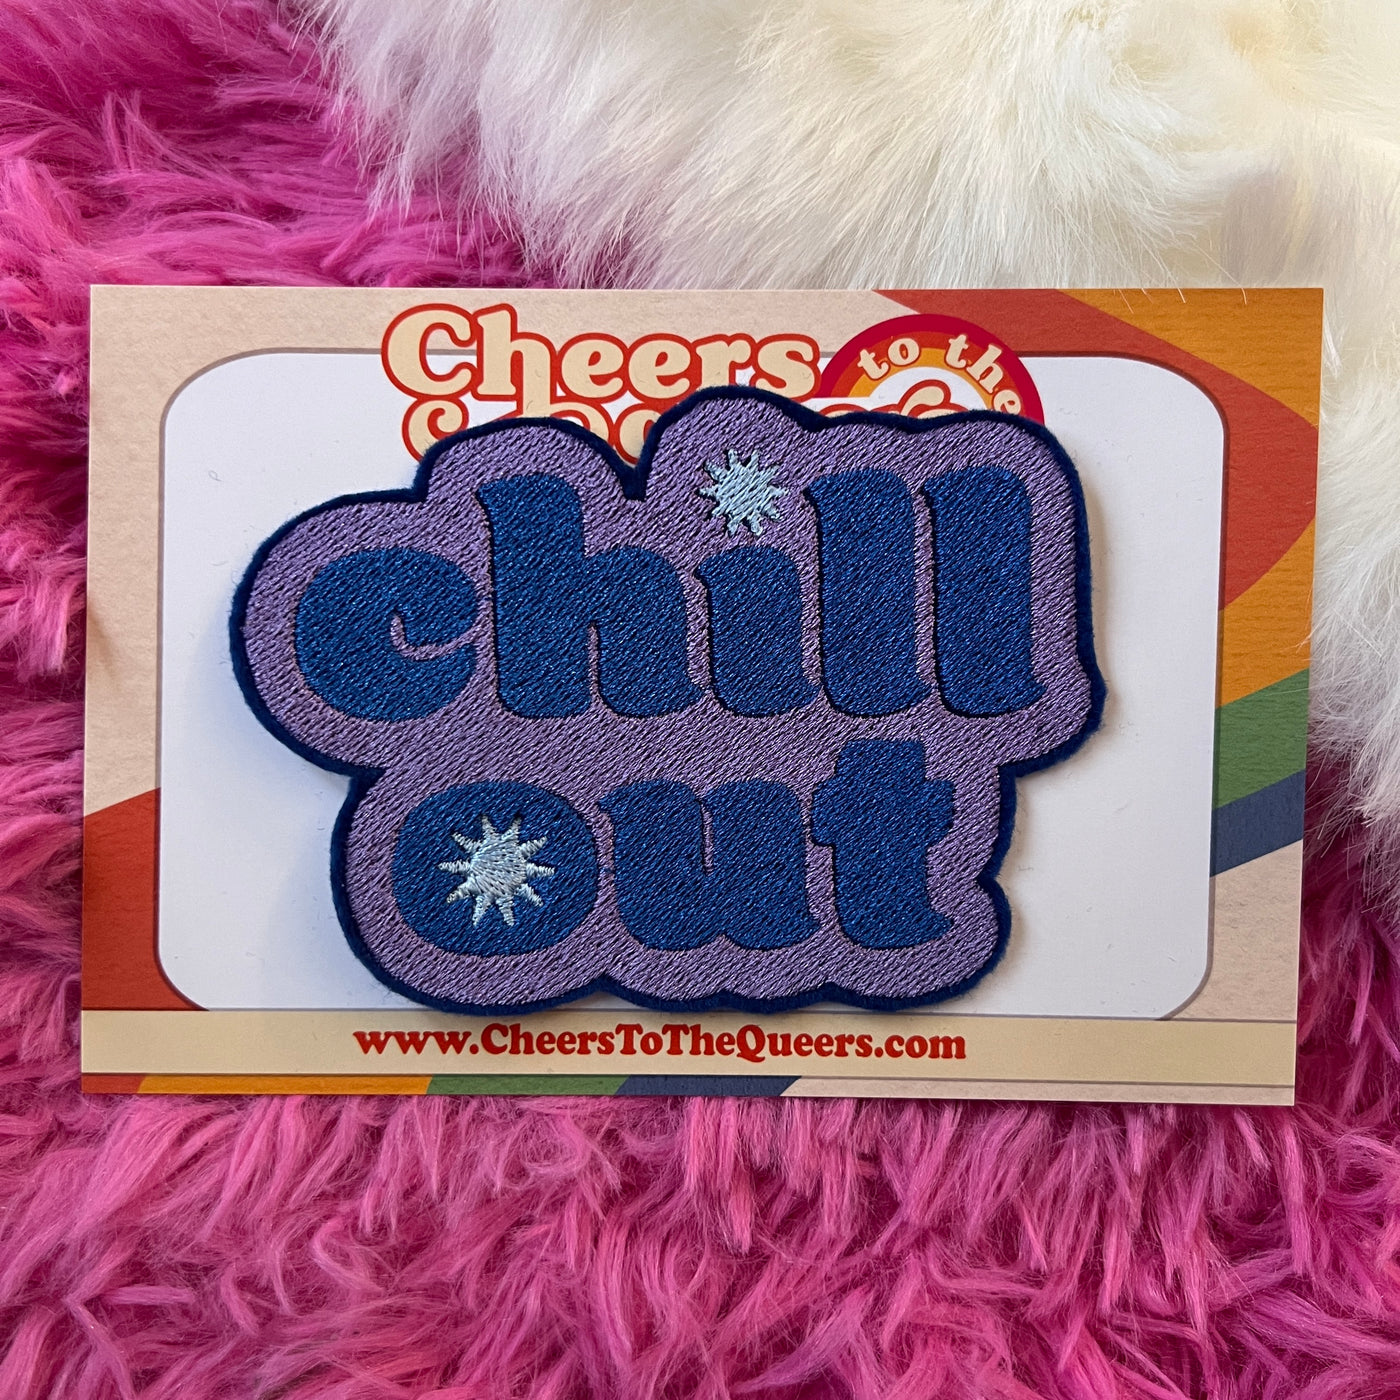 Chill Out Felt Iron on Patch